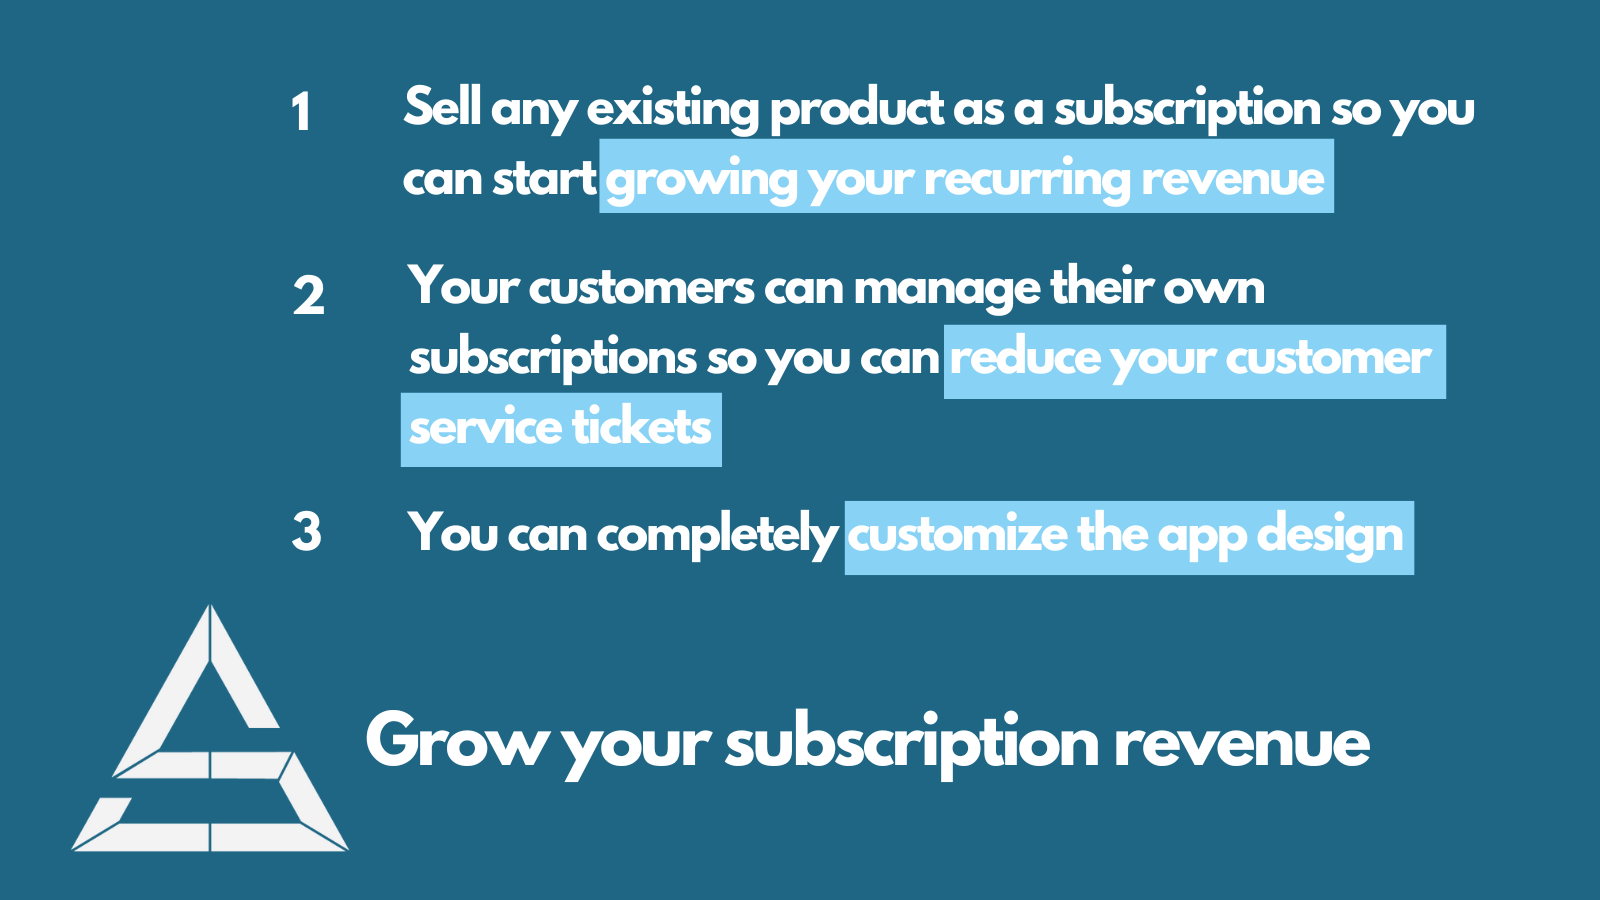 Subamplify helps you to grow your subscription revenue